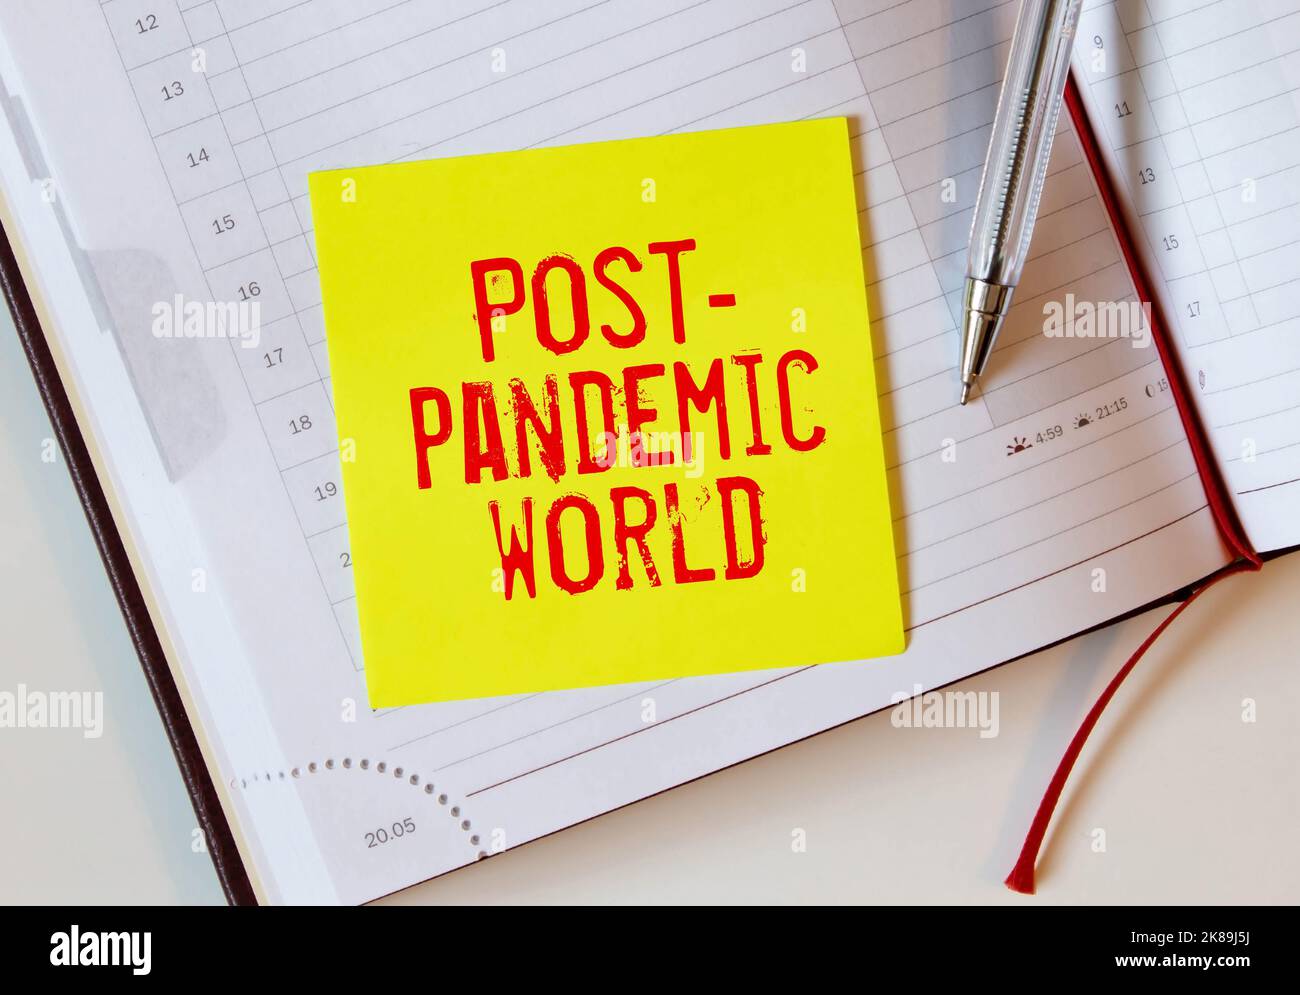 Post-pandemic world symbol. Hand in blue glove with white card. Concept words 'Post-pandemic world'. Metalic pen. Medical and COVID-19 pandemic post-p Stock Photo